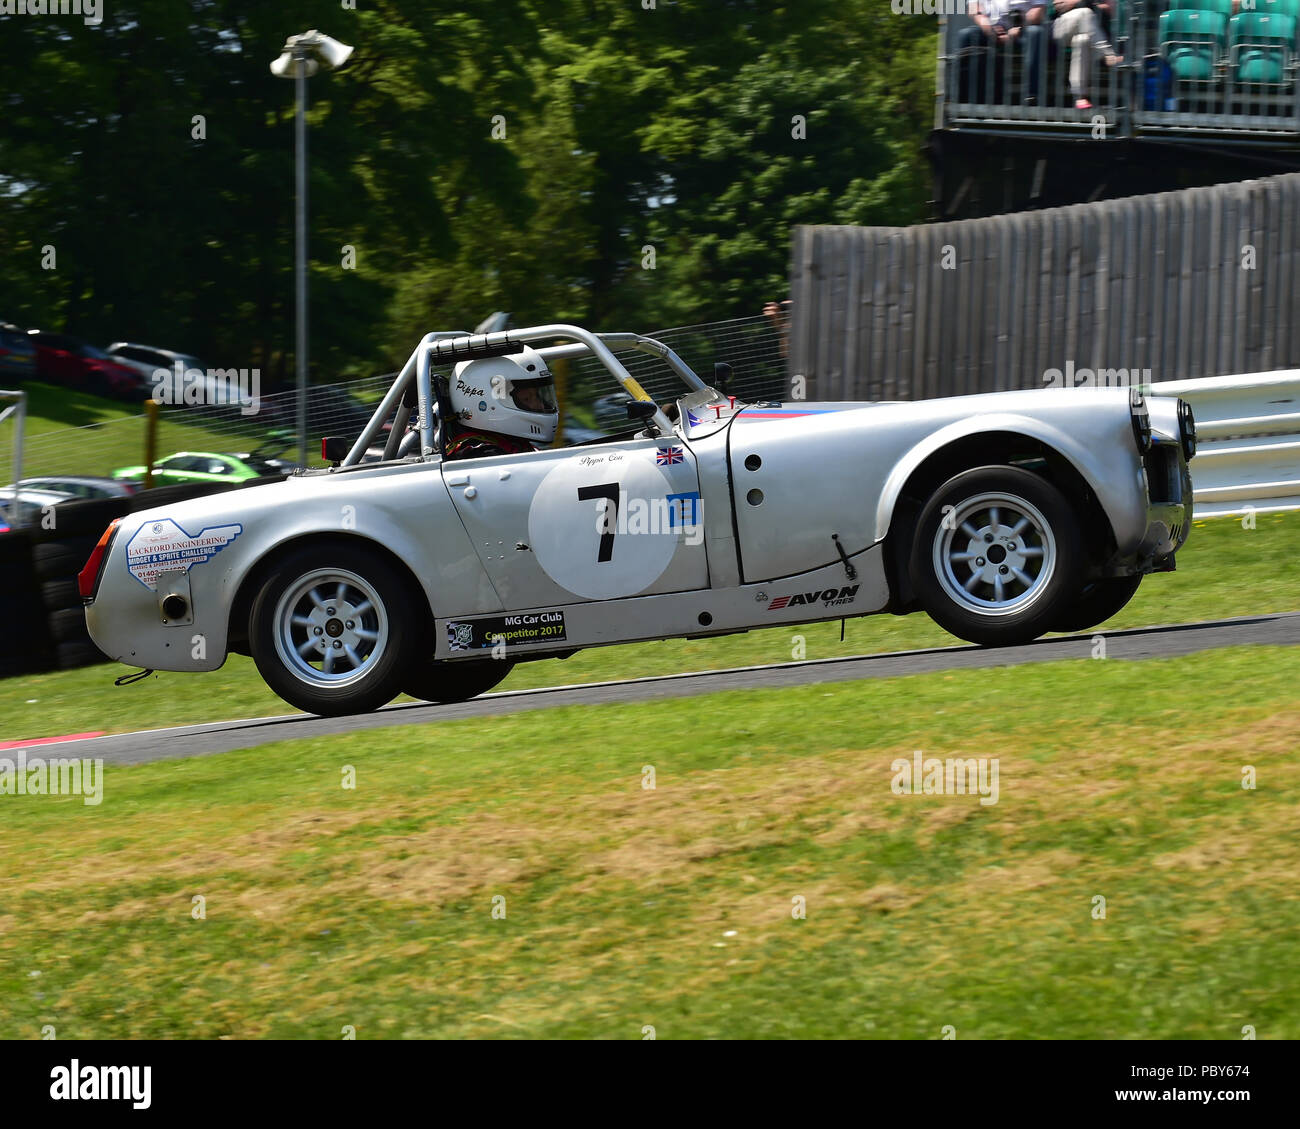 Pippa Cow, MG Midget, Sprite Midget Challenge, HSCC Wolds Trophy May 20th, 2018, Cadwell Park, cars, Classic Racing Cars, Historic Racing, Historic Sp Stock Photo